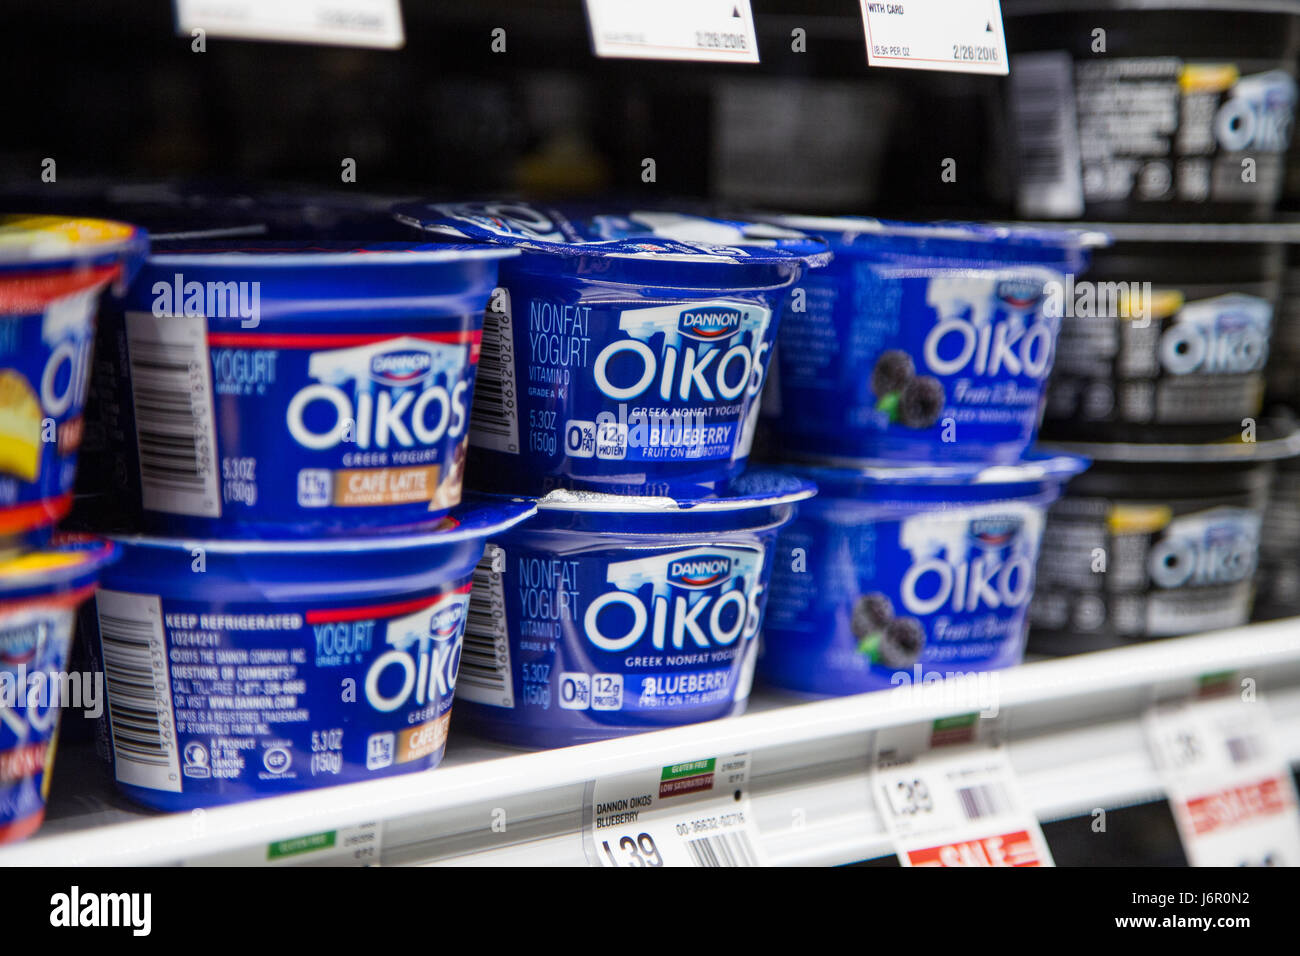 packages of Oikos Greek yogurt on the shelf in the refrigerator case of a grocery store Stock Photo